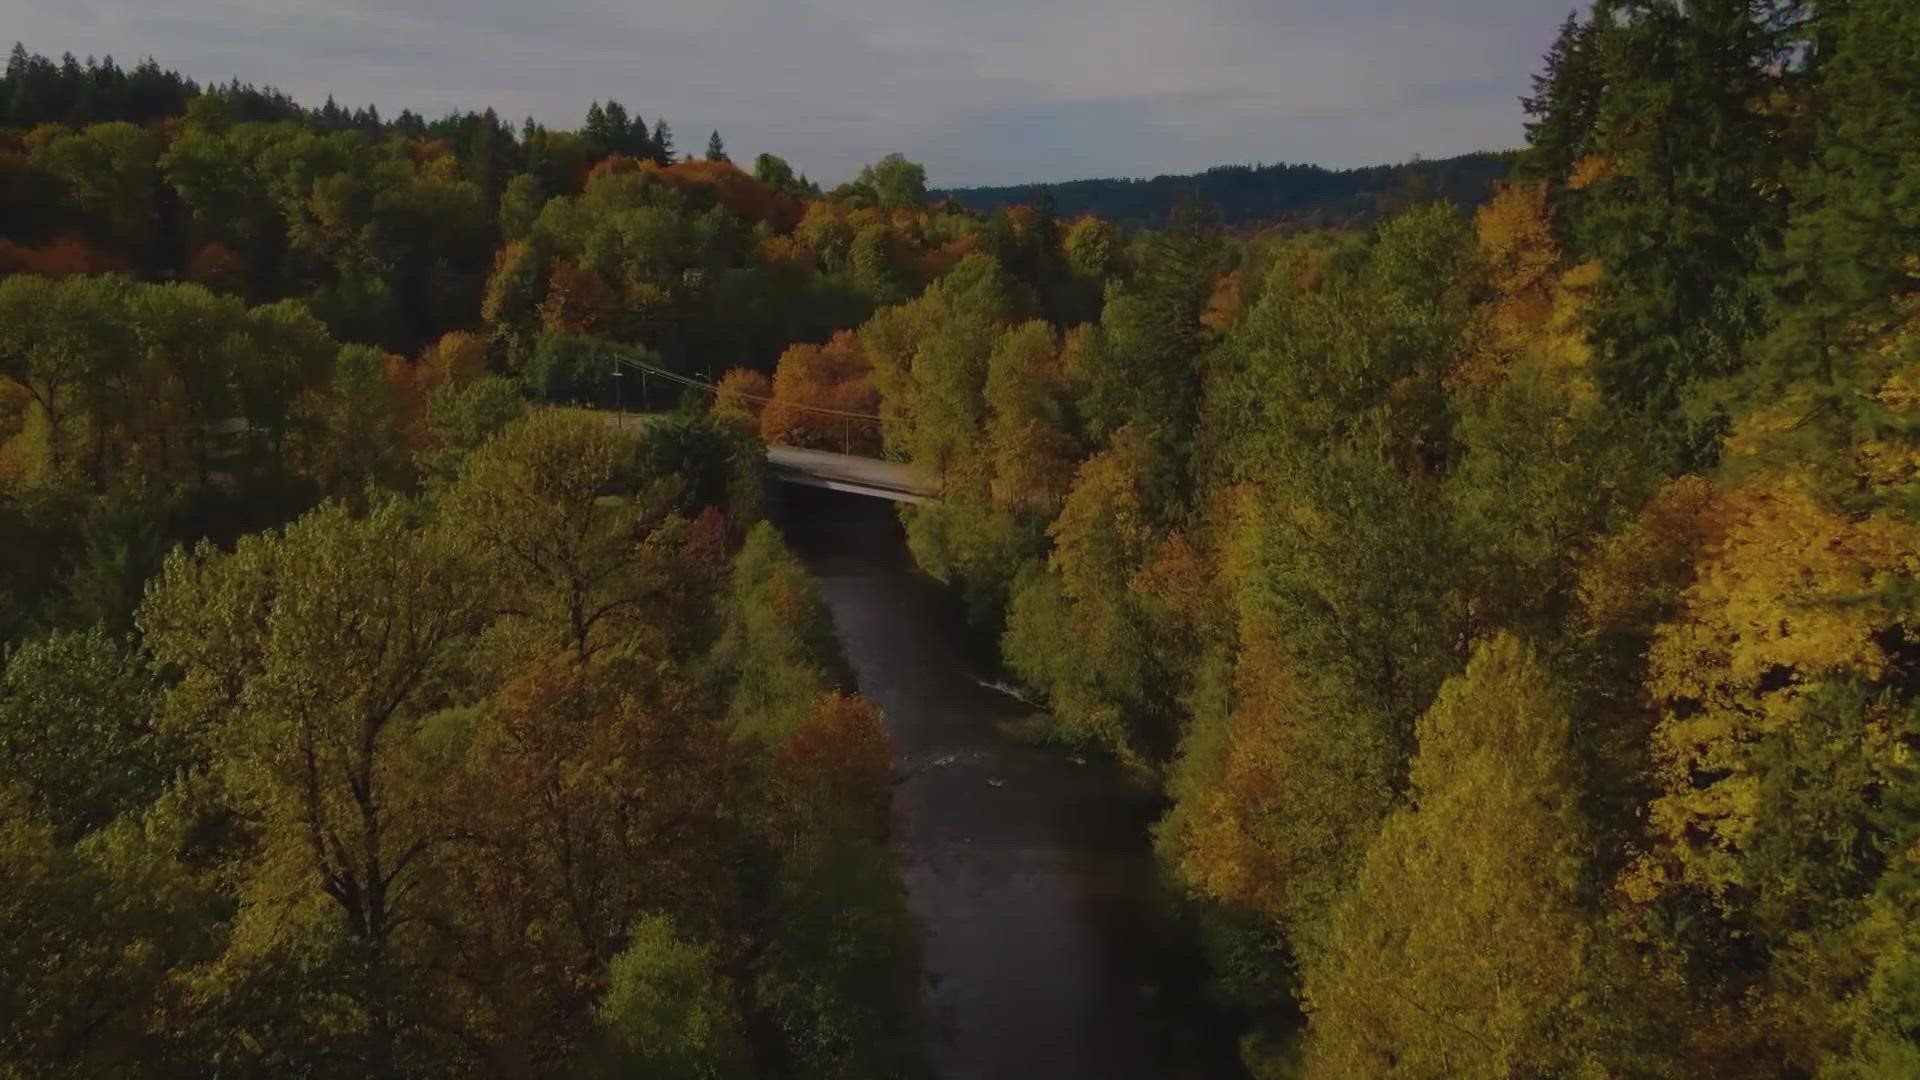 Drone footage of fall foliage over the Cedar River near East Renton, Wash. from October 2021.